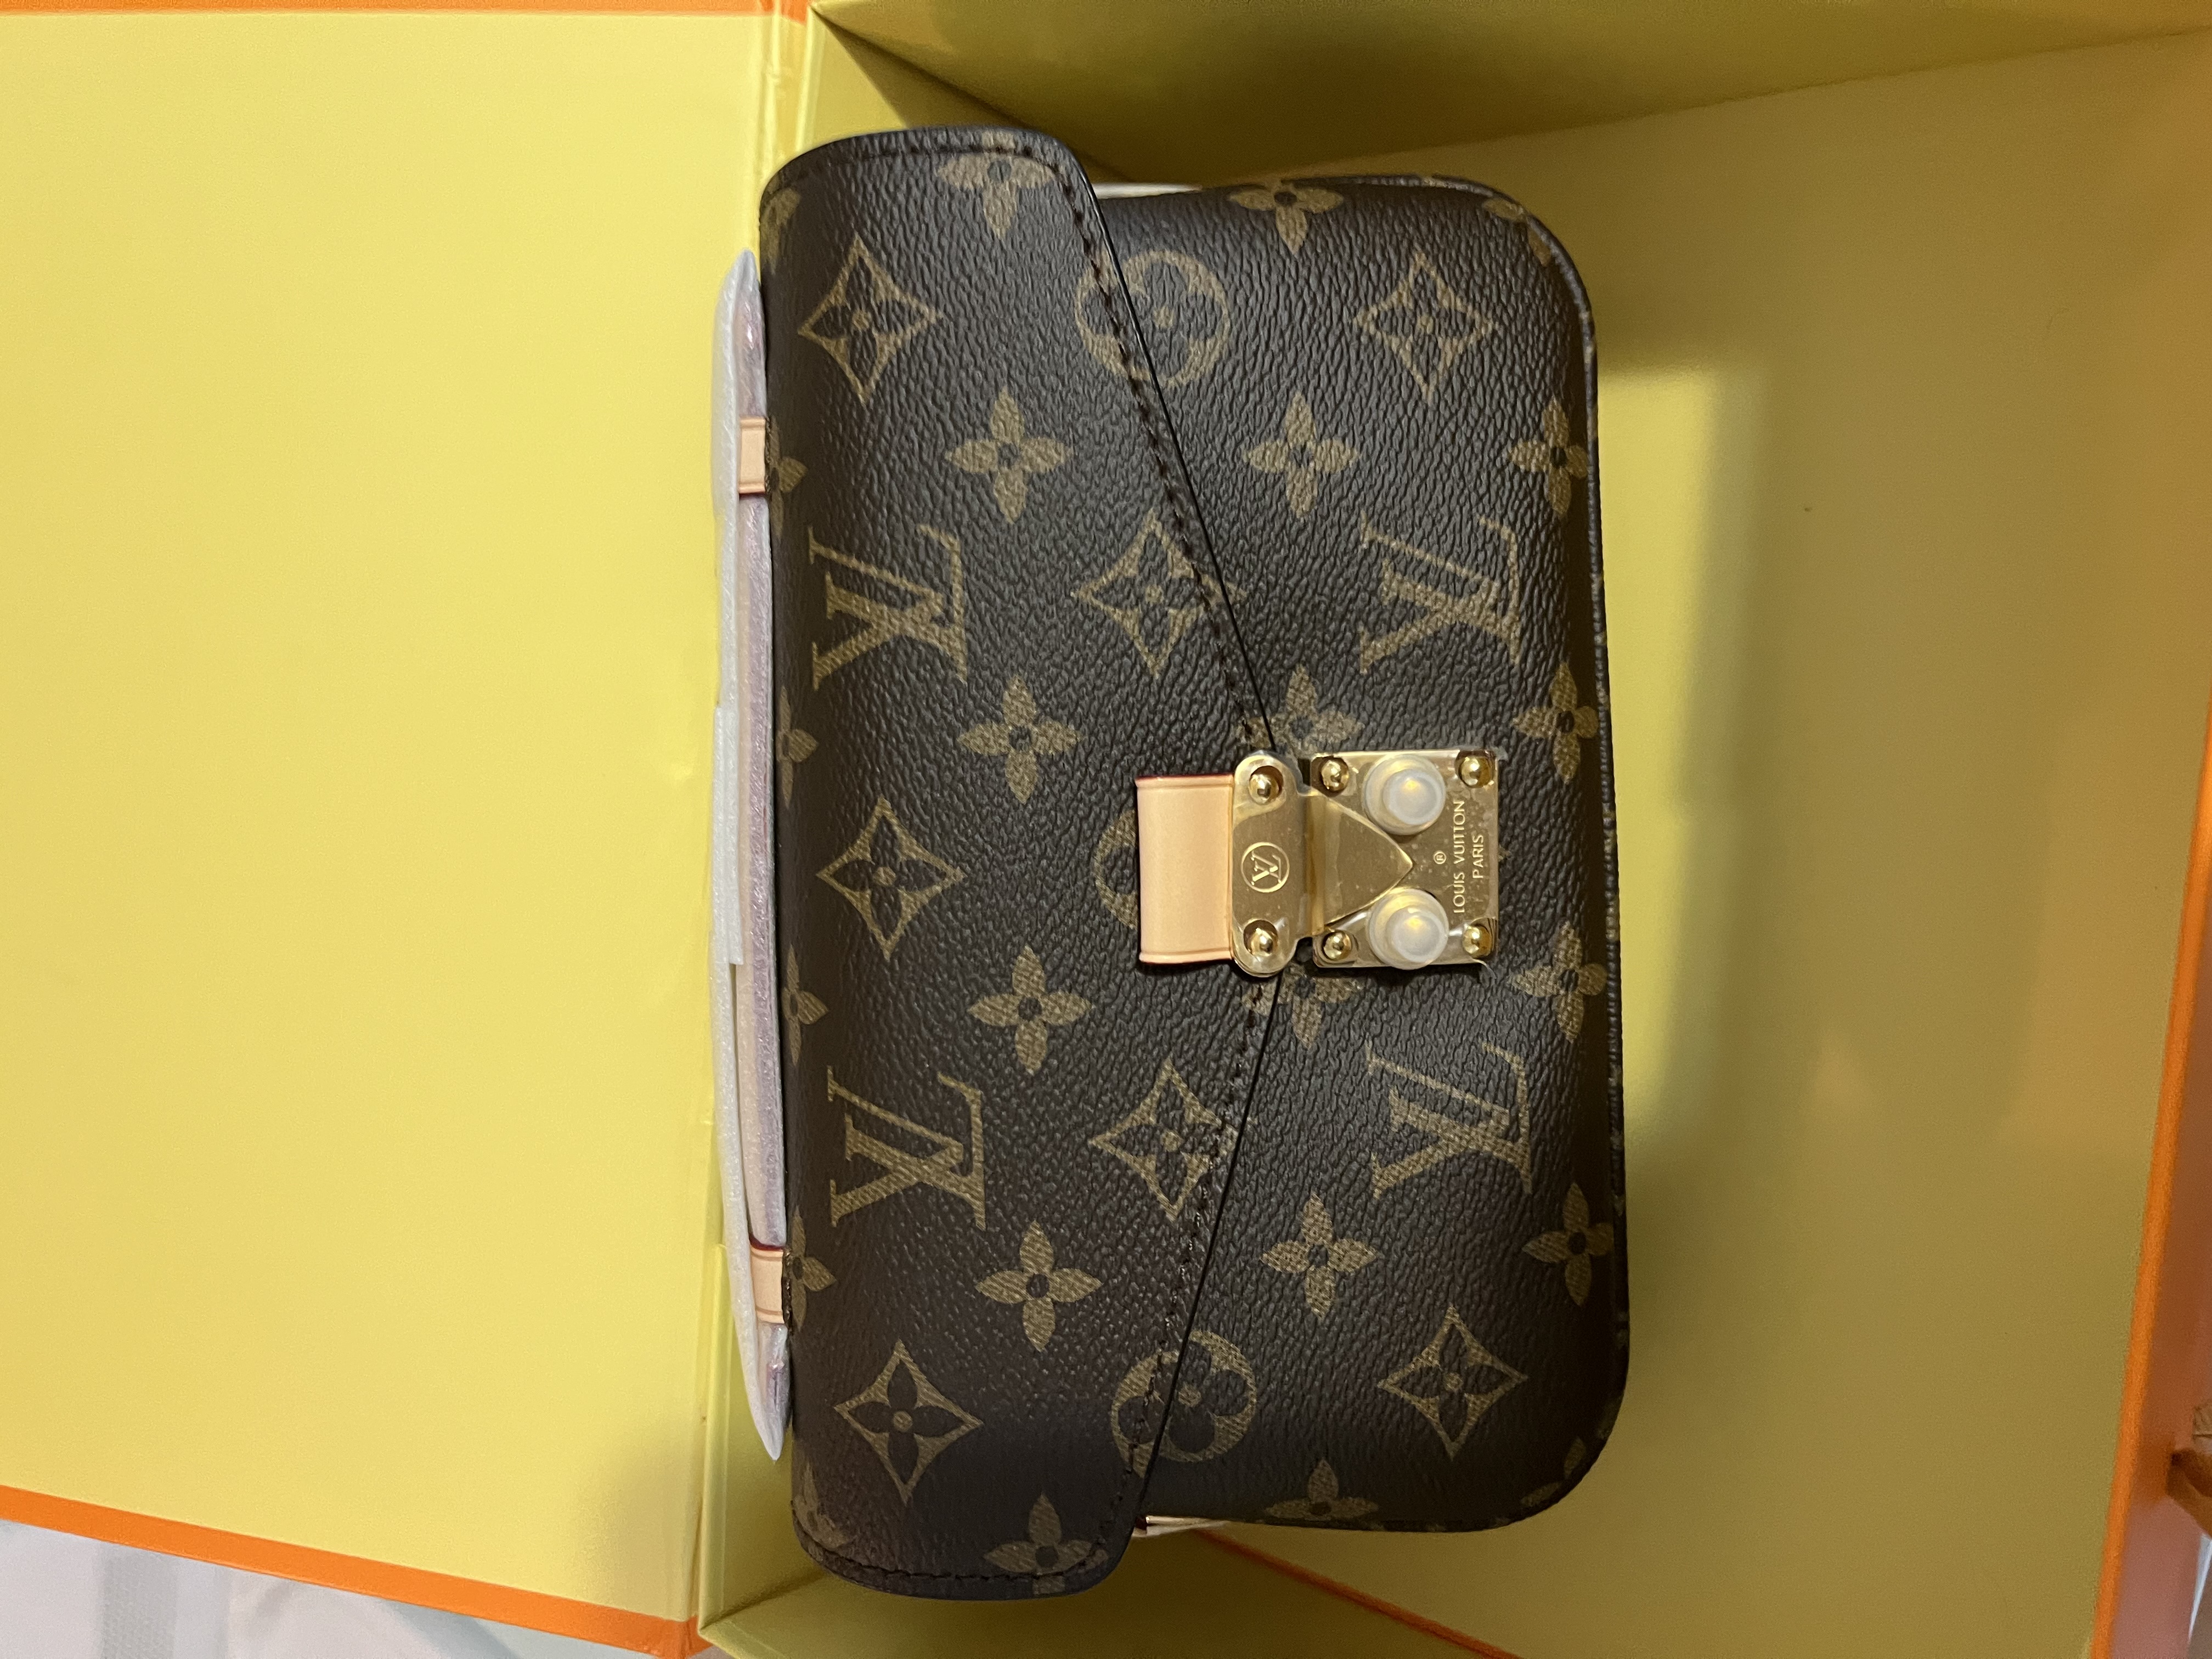 What are some mistakes that people make when buying their first Louis  Vuitton (LV) speedy bag? - Quora